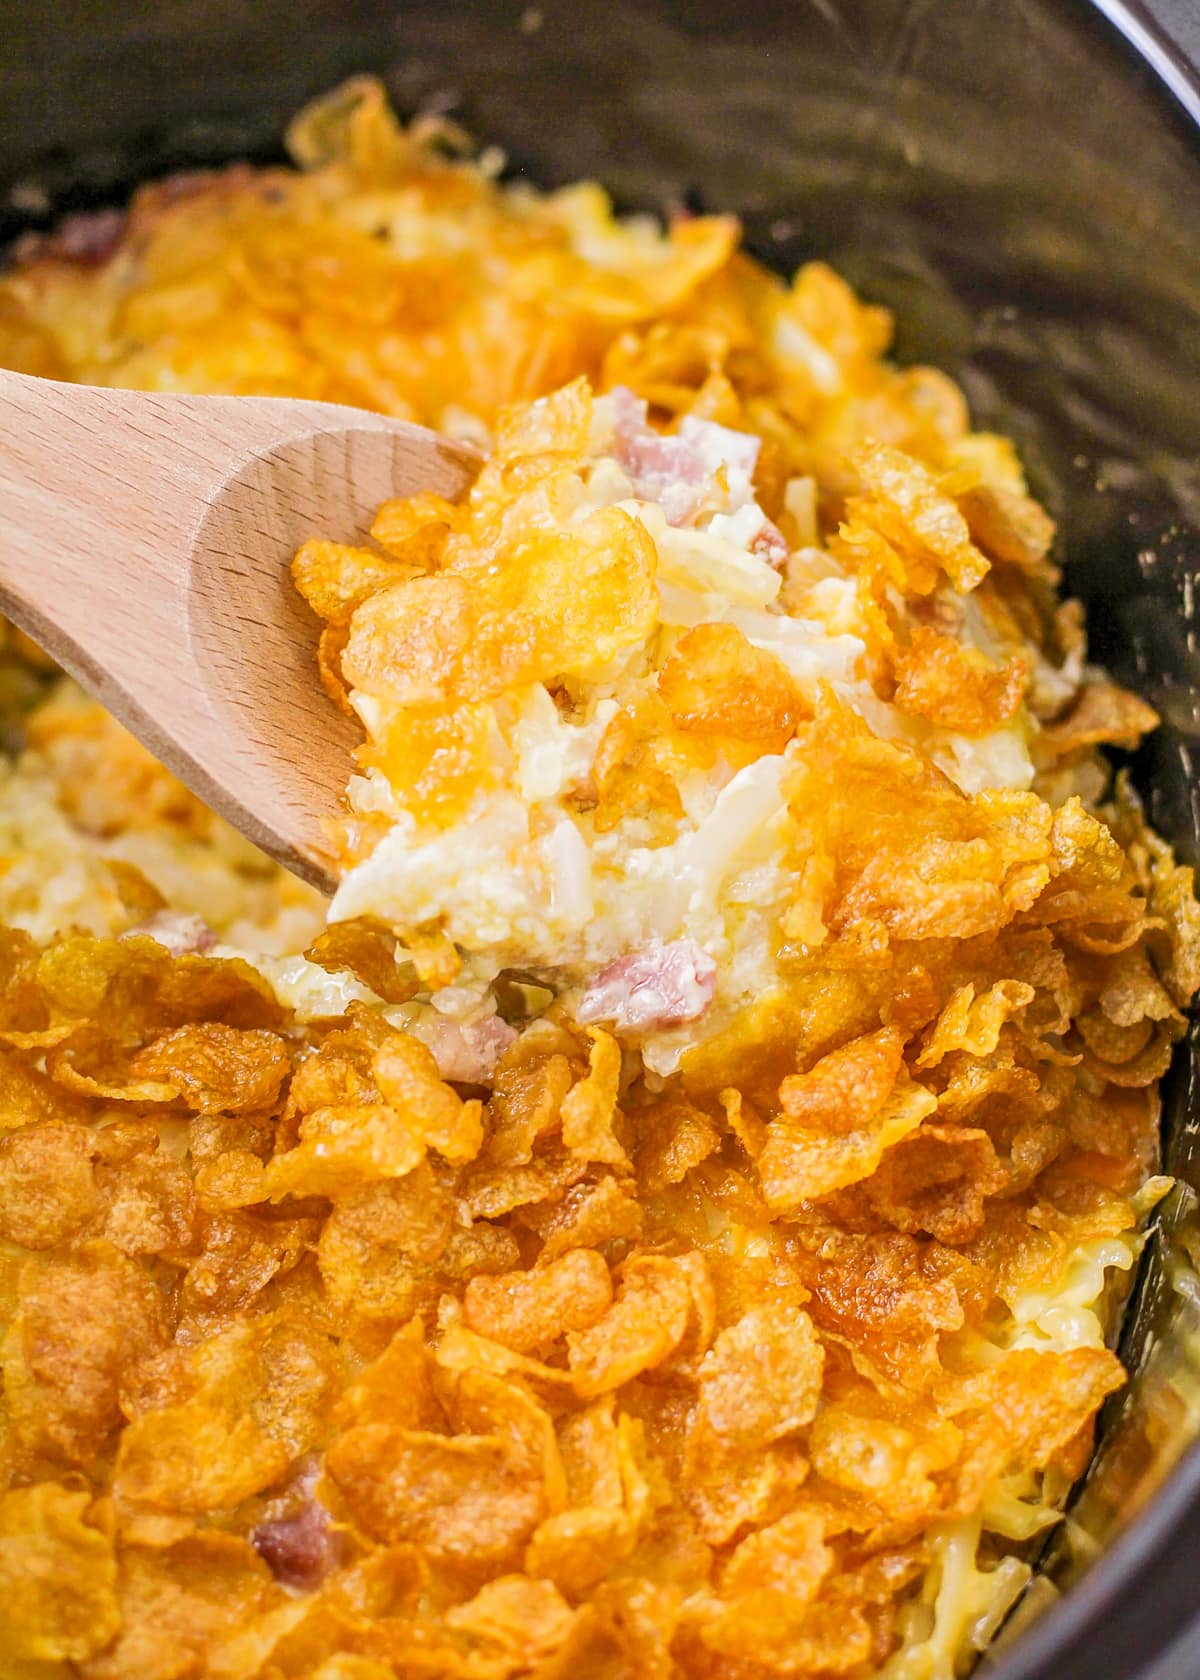 Scooping crockpot hashbrown casserole from a slow cooker.